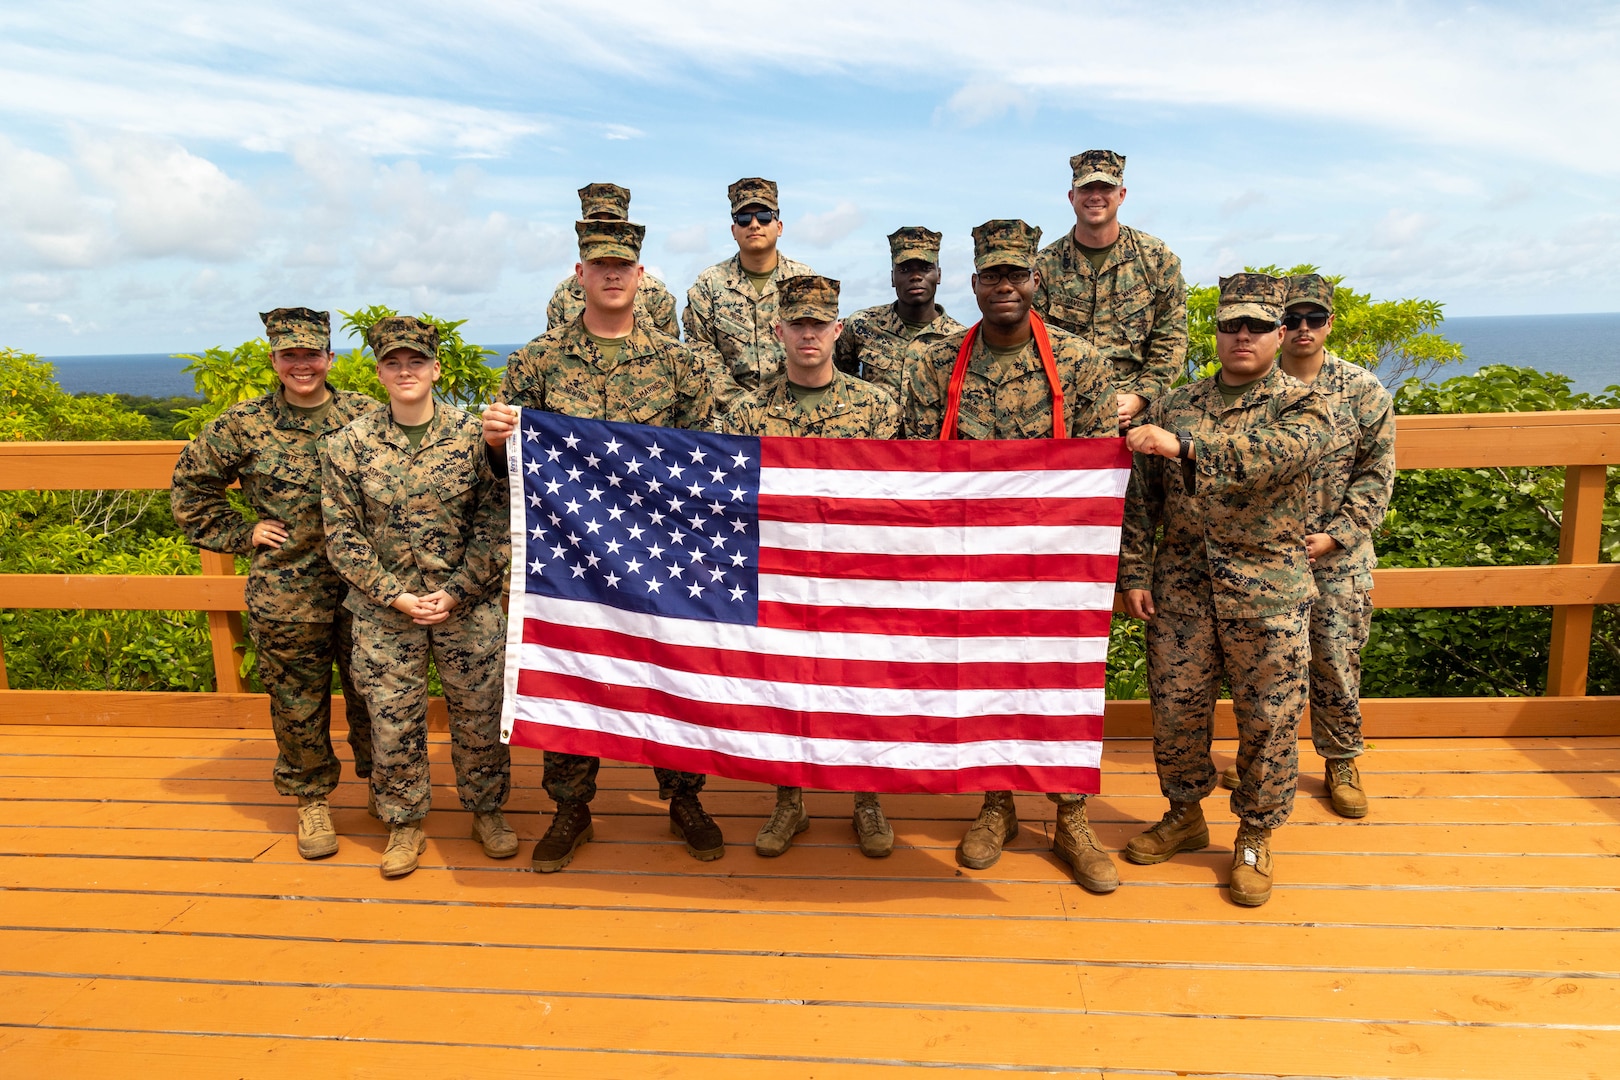 U.S. Marines with Task Force Koa Moana 23 pose for a photograph at the conclusion of a promotion ceremony for Cpl. Trent Henry, a native of El Paso, Texas and a combat photographer with the task force, atop Bloody Nose Ridge in Peleliu, Palau, Sept. 1, 2023. Task Force Koa Moana 23, composed of U.S. Marines and Sailors from I Marine Expeditionary Force, deployed to the Indo-Pacific to strengthen relationships with Pacific Island partners through bilateral and multilateral security cooperation and community engagements. (U.S. Marine Corps photo by Staff Sgt. Courtney G. White)